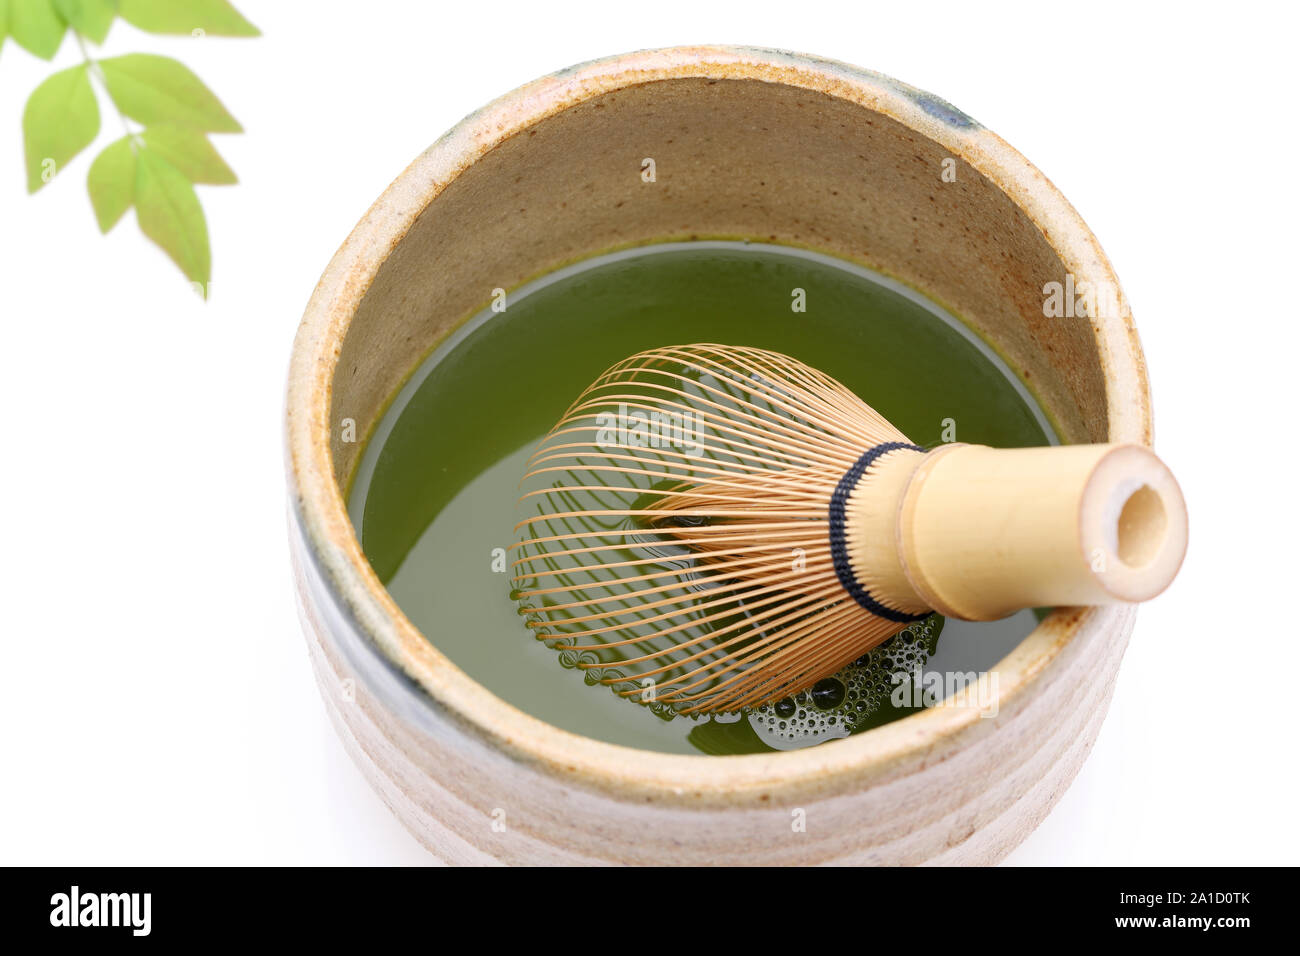 Japanese matcha green tea in a ceramic bowl with tea whisk Stock Photo